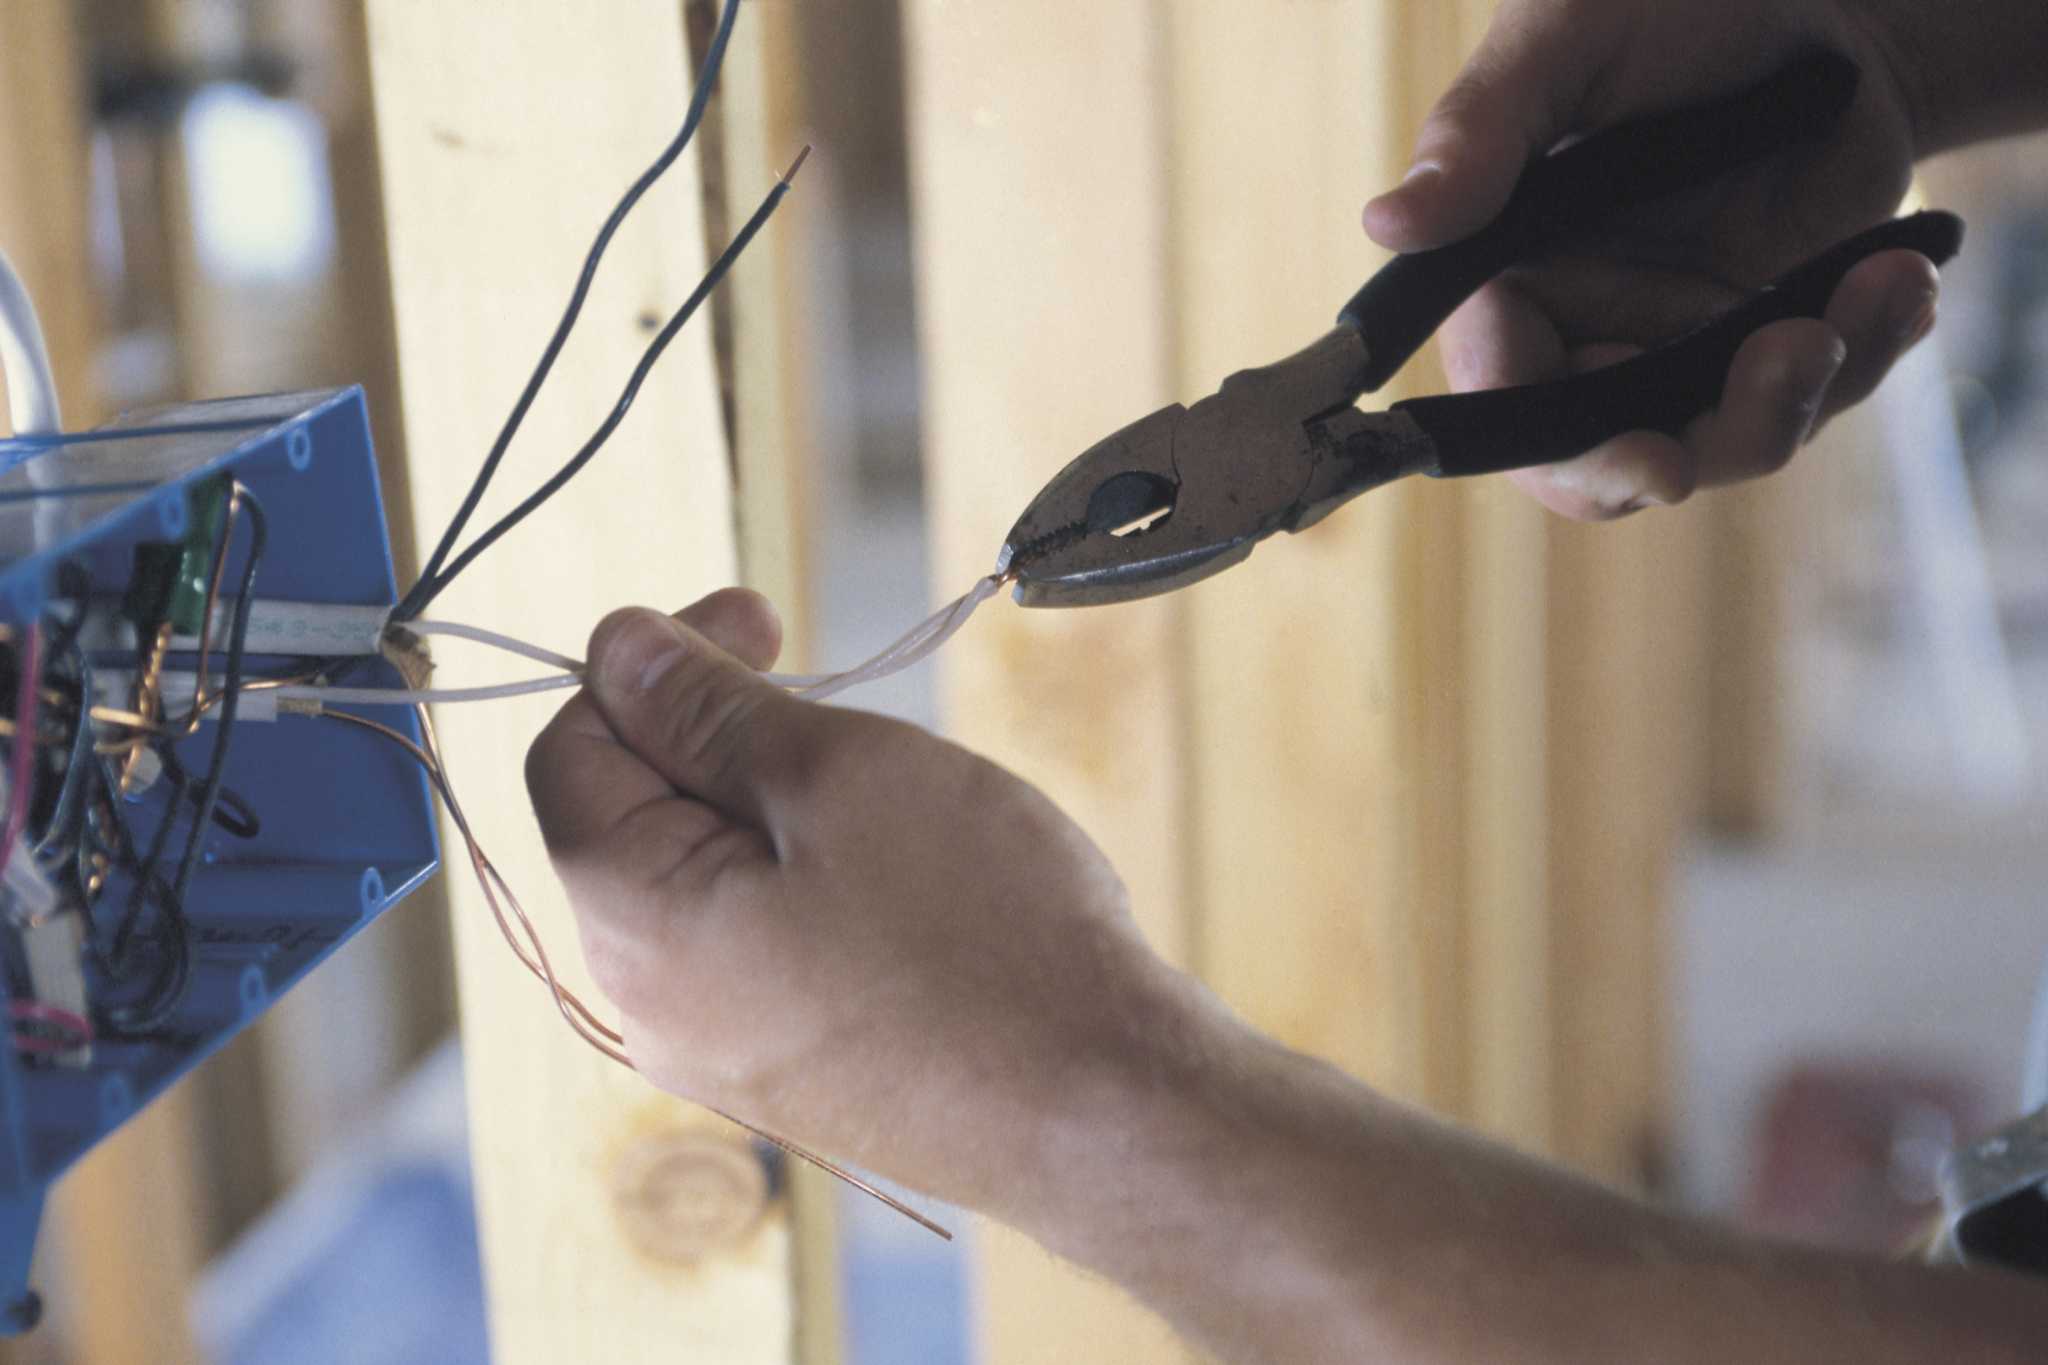 How to Insulate Your Wires - Nutech